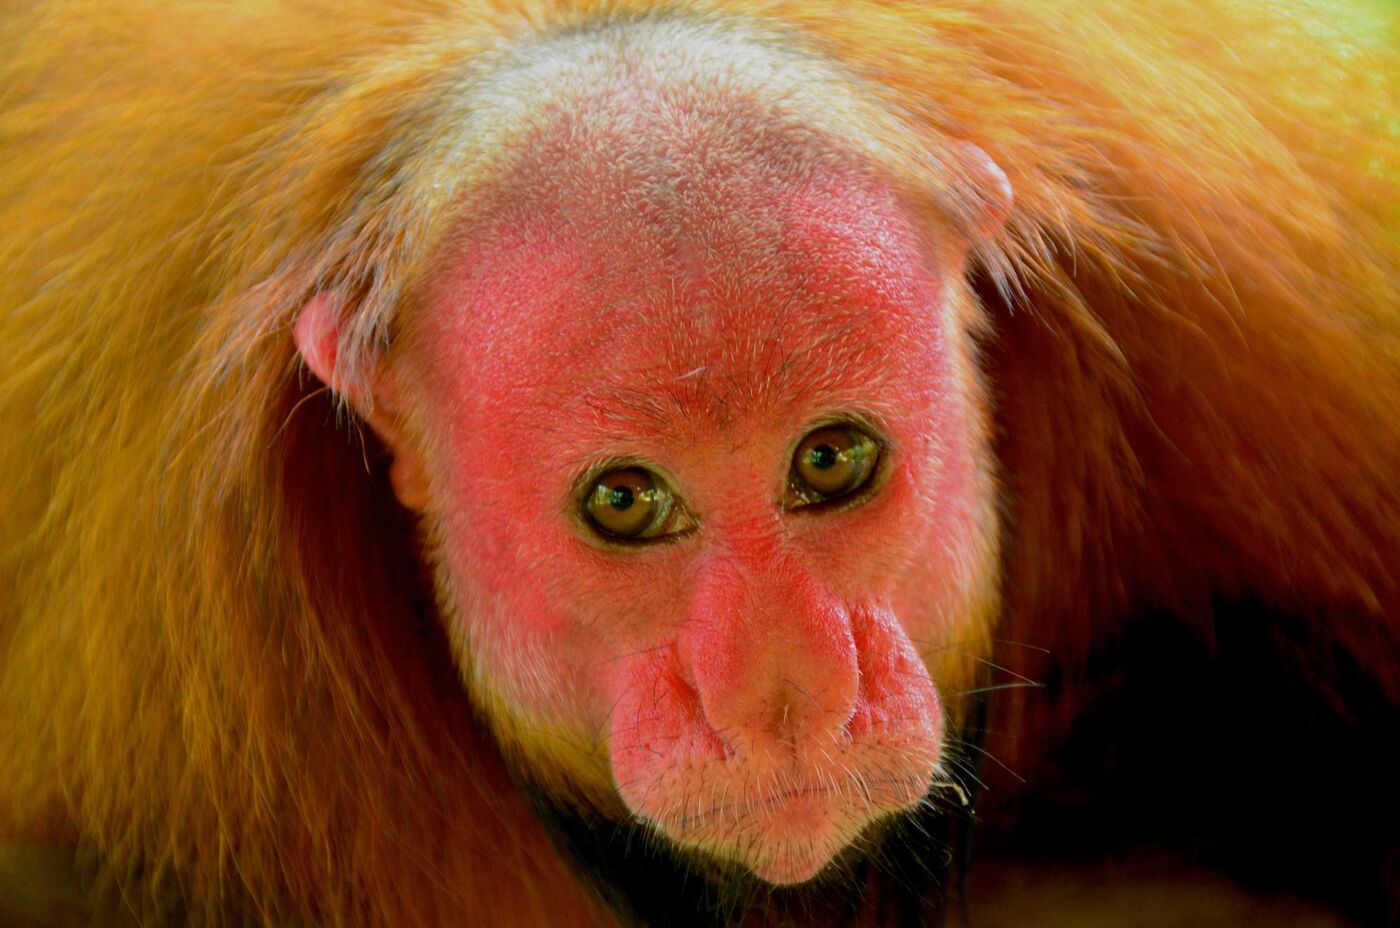 A close-up portrait of a golden haired monkey with a bald, pink face.